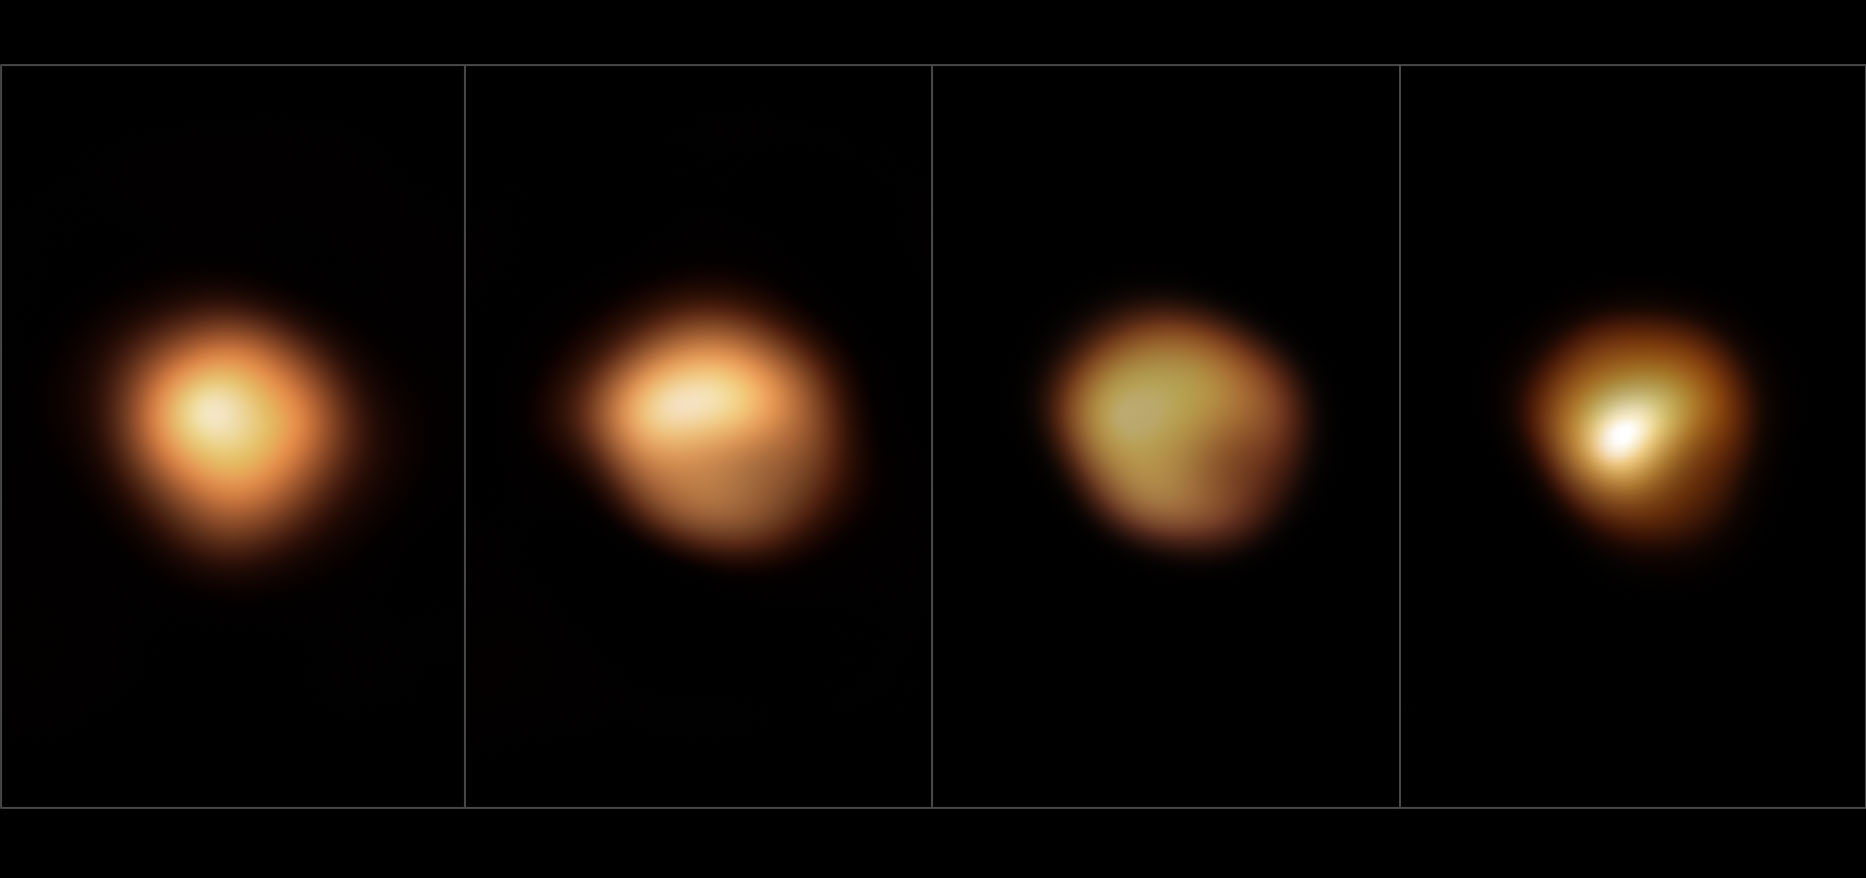 These images show the surface of the red supergiant star Betelgeuse during its unprecedented dimming, which happened in late 2019 and early 2020. The image on the far left, taken in January 2019, shows the star at its normal brightness, while the remaining images, from December 2019, January 2020, and March 2020, were all taken when the stars brightness had noticeably dropped, especially in its southern region.